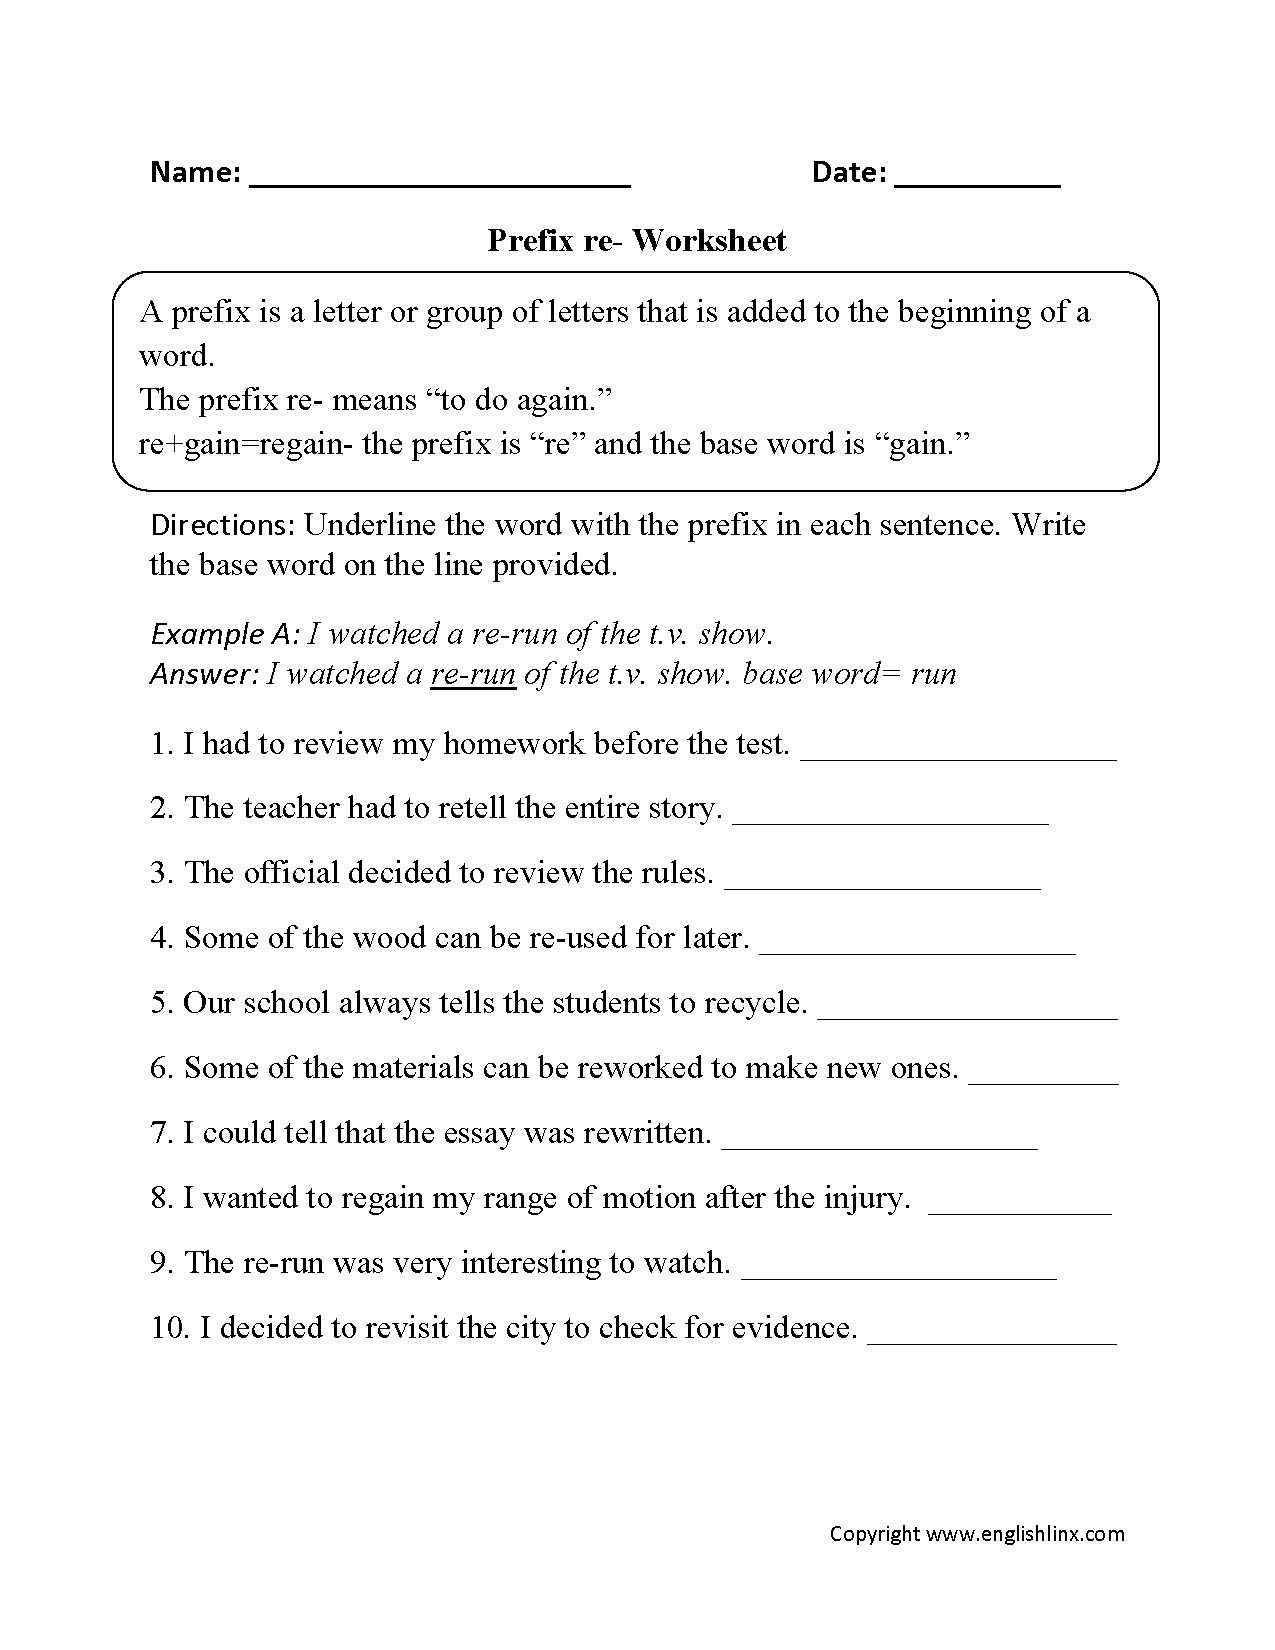 Mass Weight and Gravity Worksheet Answers Also Mass Volume Density Triangle Worksheet Refrence Prefix Re Worksheet